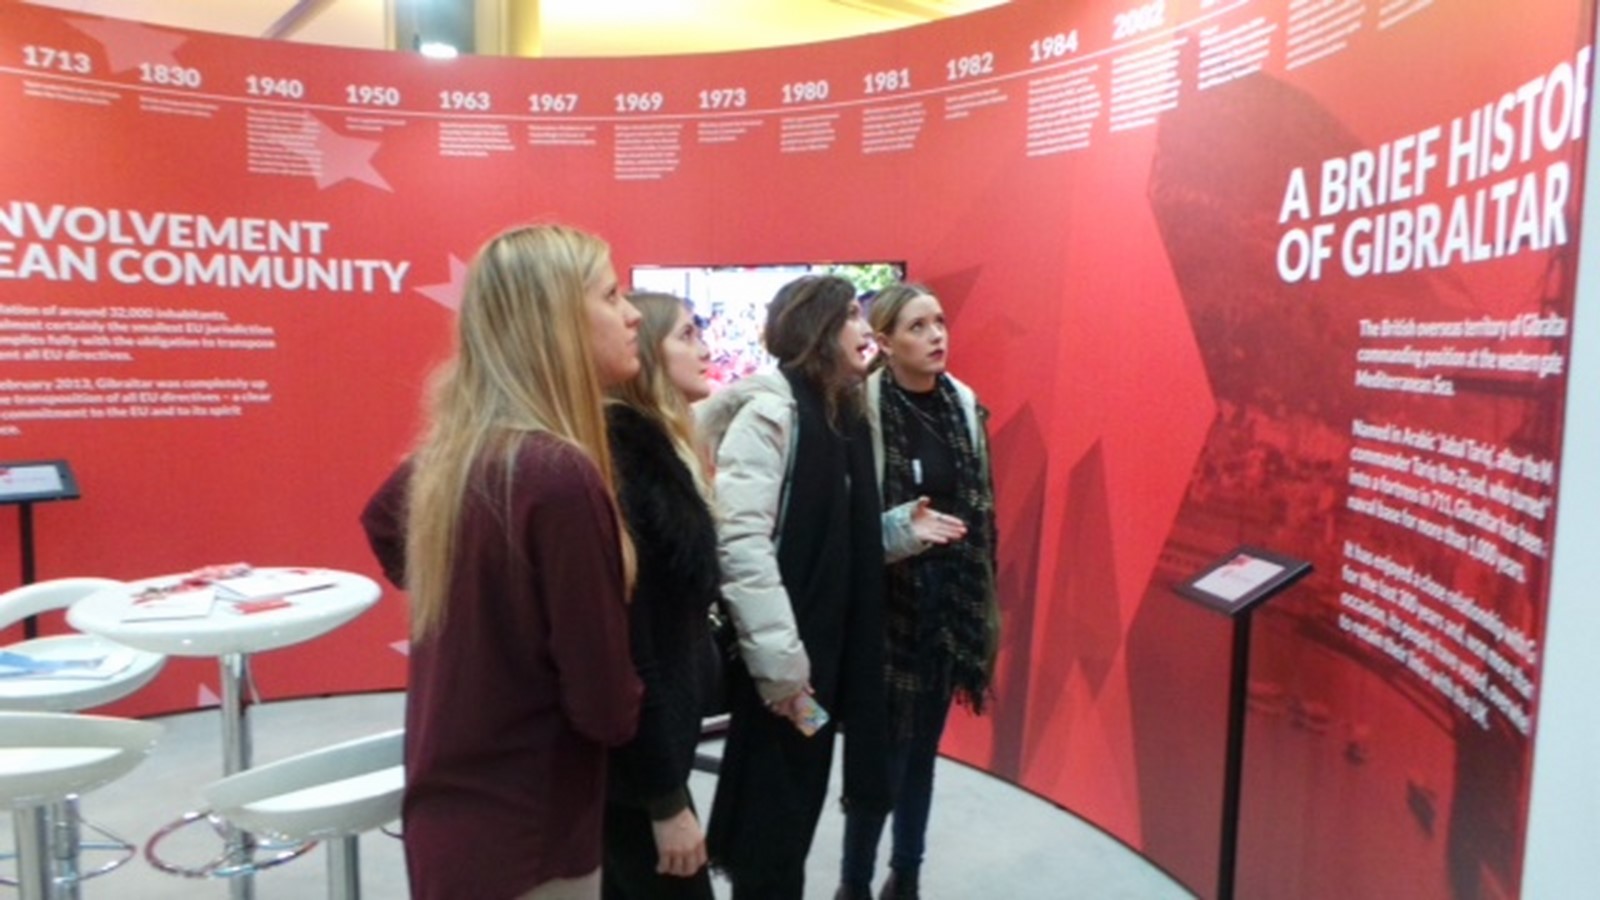 University students from Touloise visitint the stand.jpg